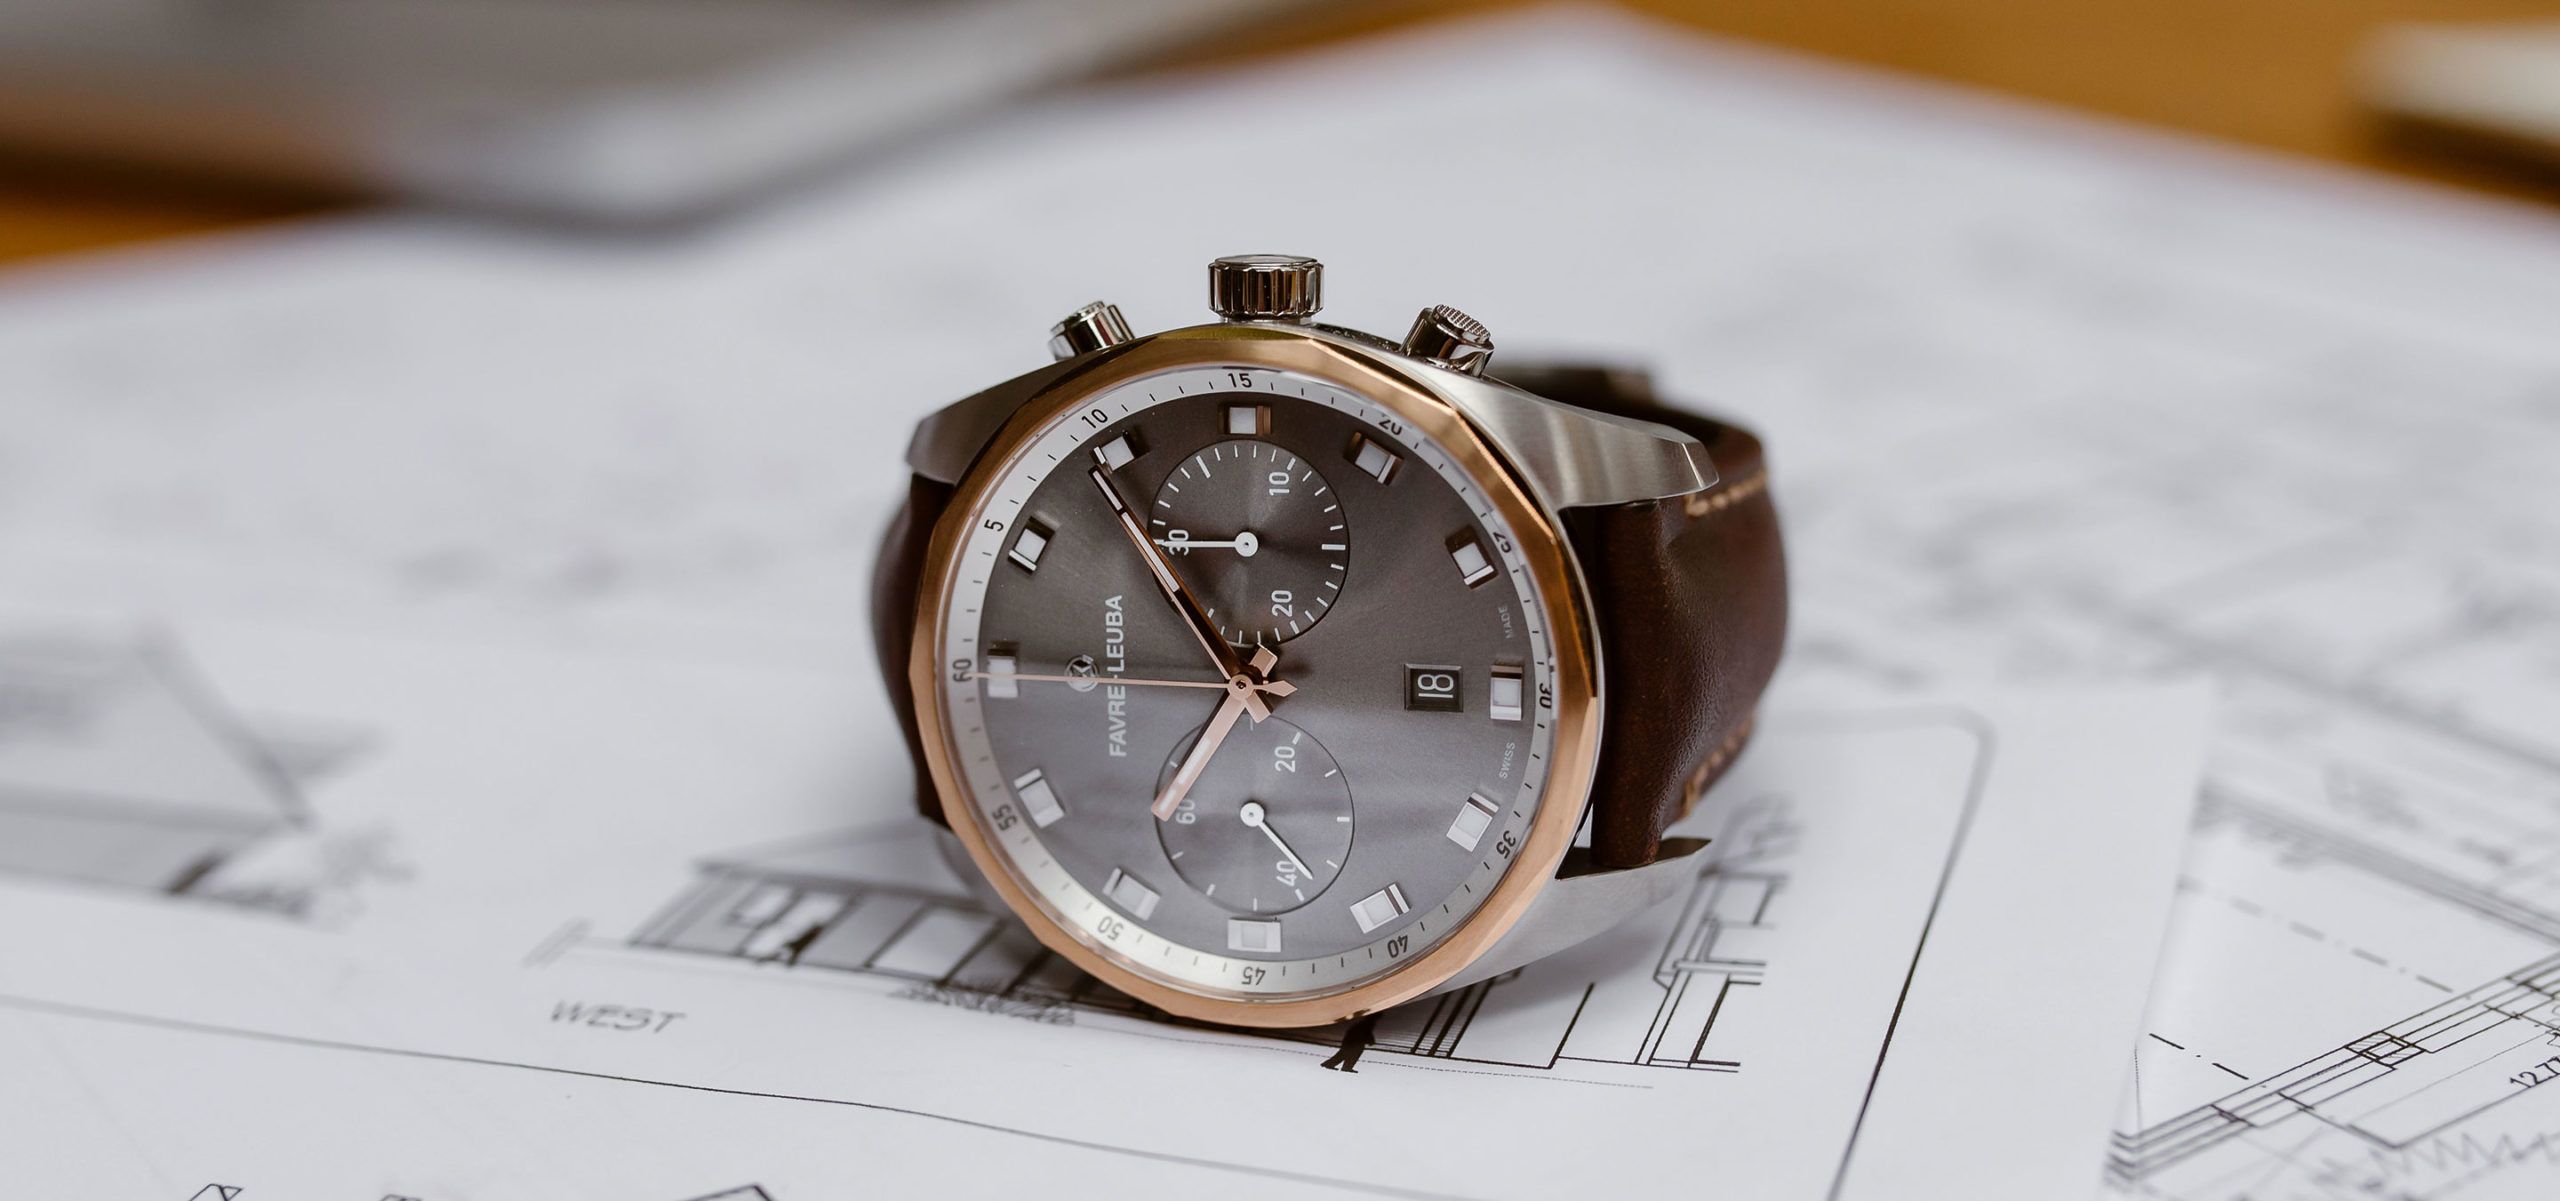 Presenting The High-Ranking Chief Chronograph Watches From Favre Leuba